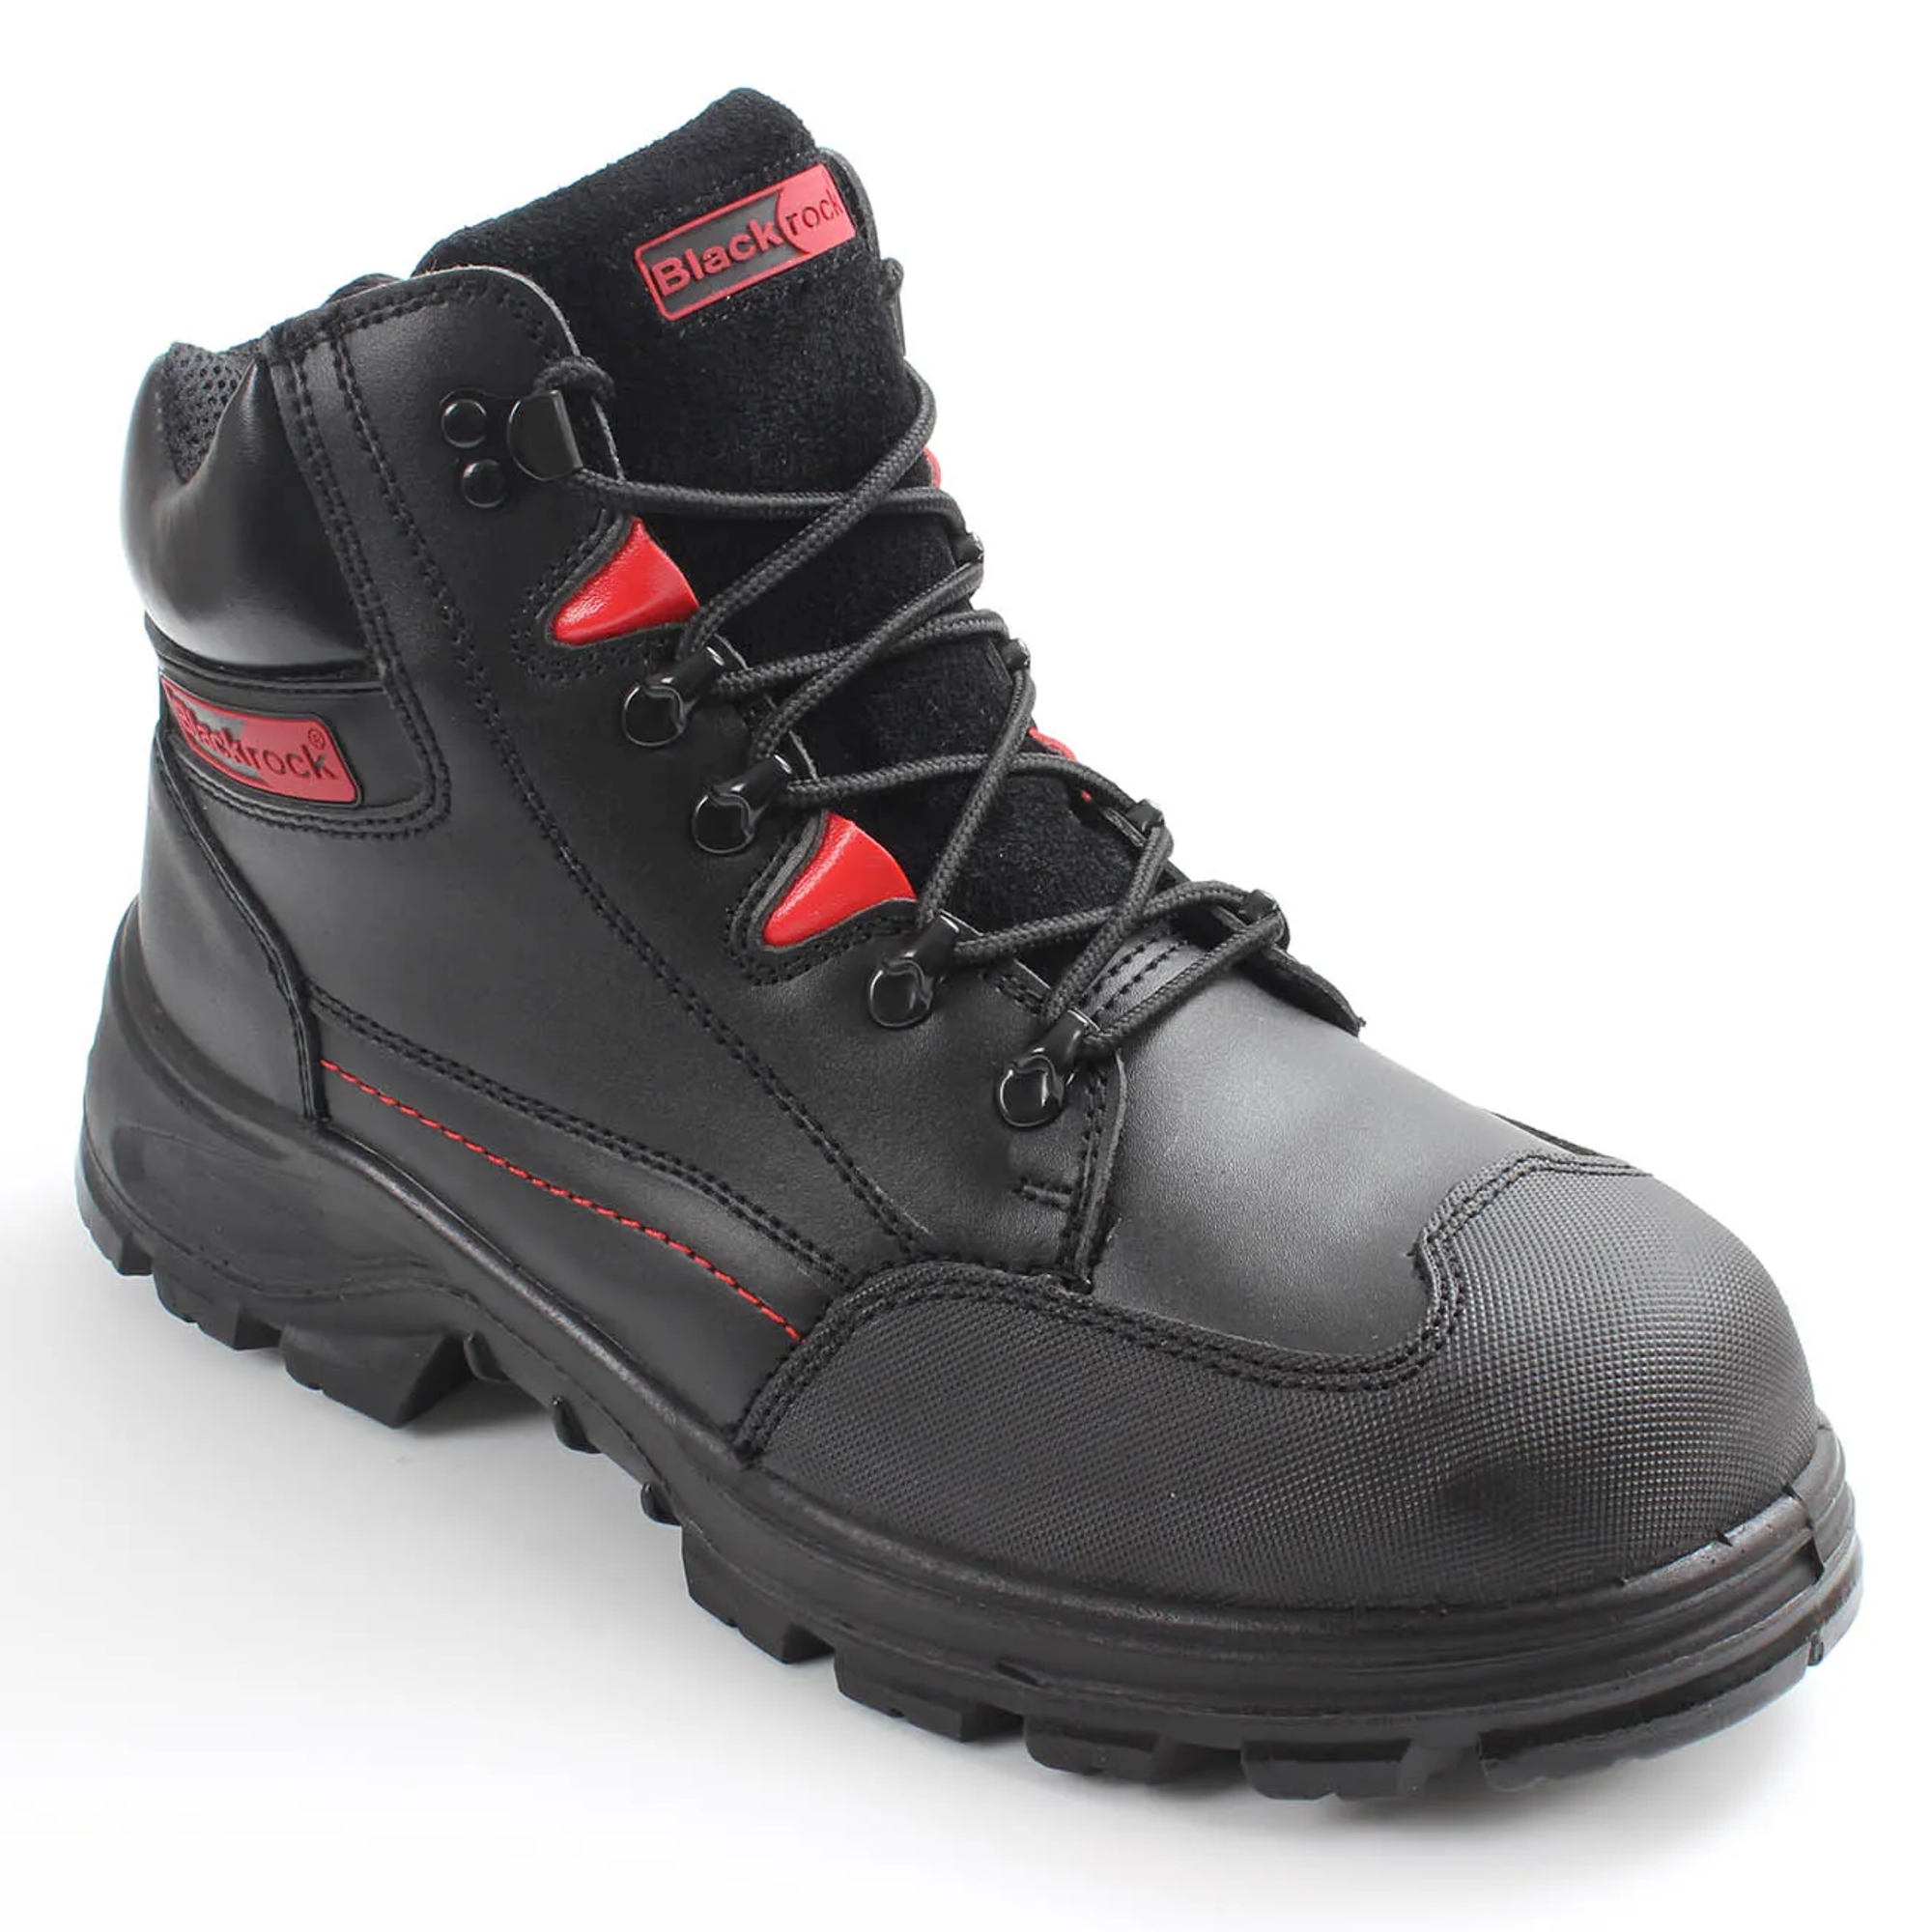 Blackrock Panther Black Leather Safety Boots Water Resistant Work Shoes SF42 